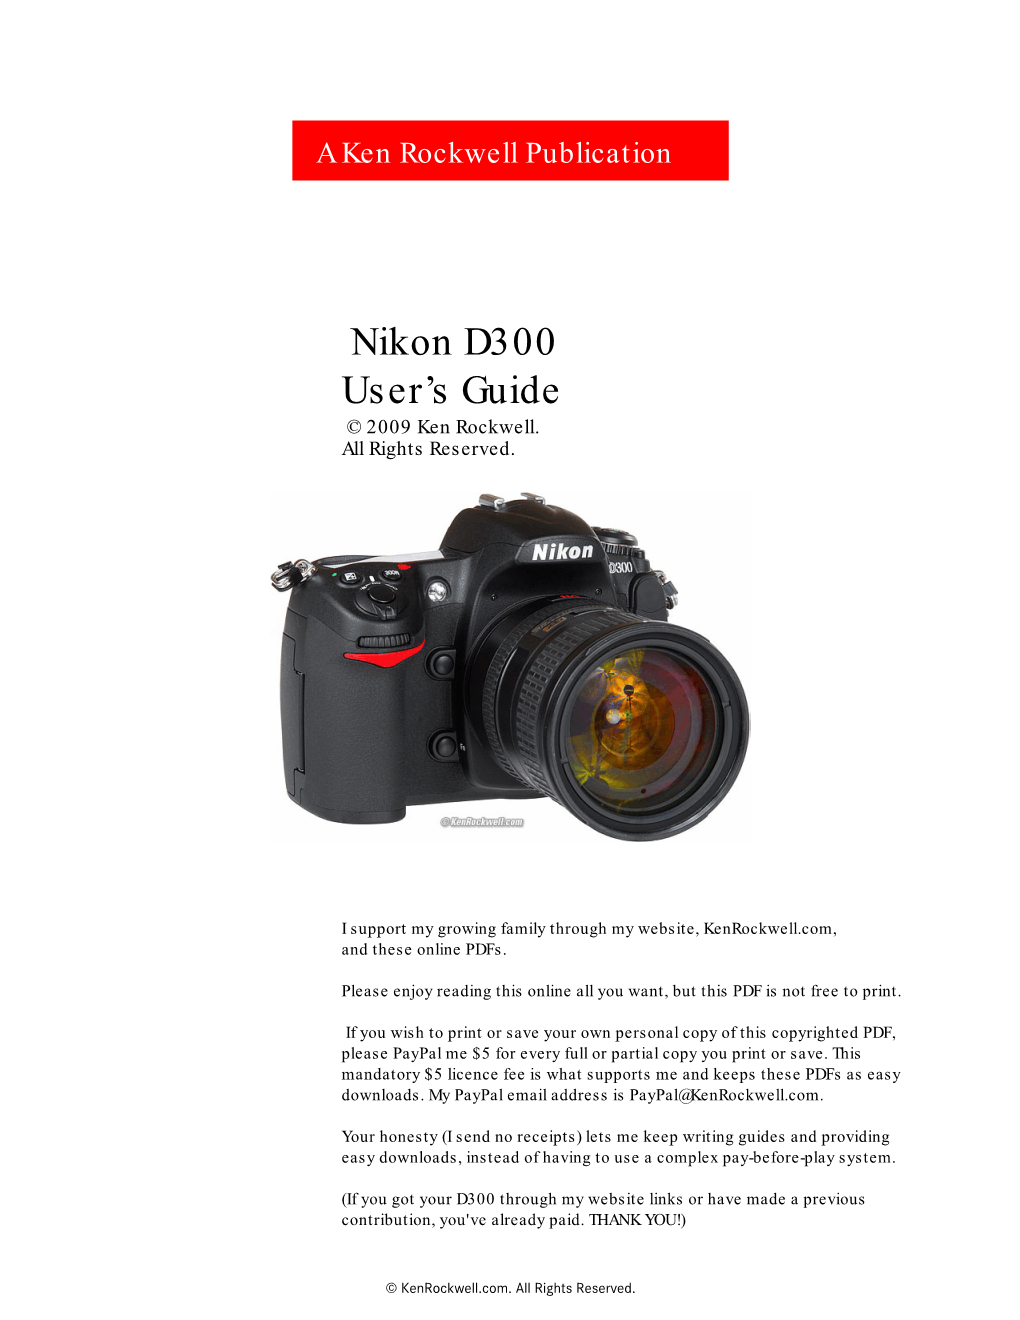 PDF Version of This Nikon D300 Users Guide